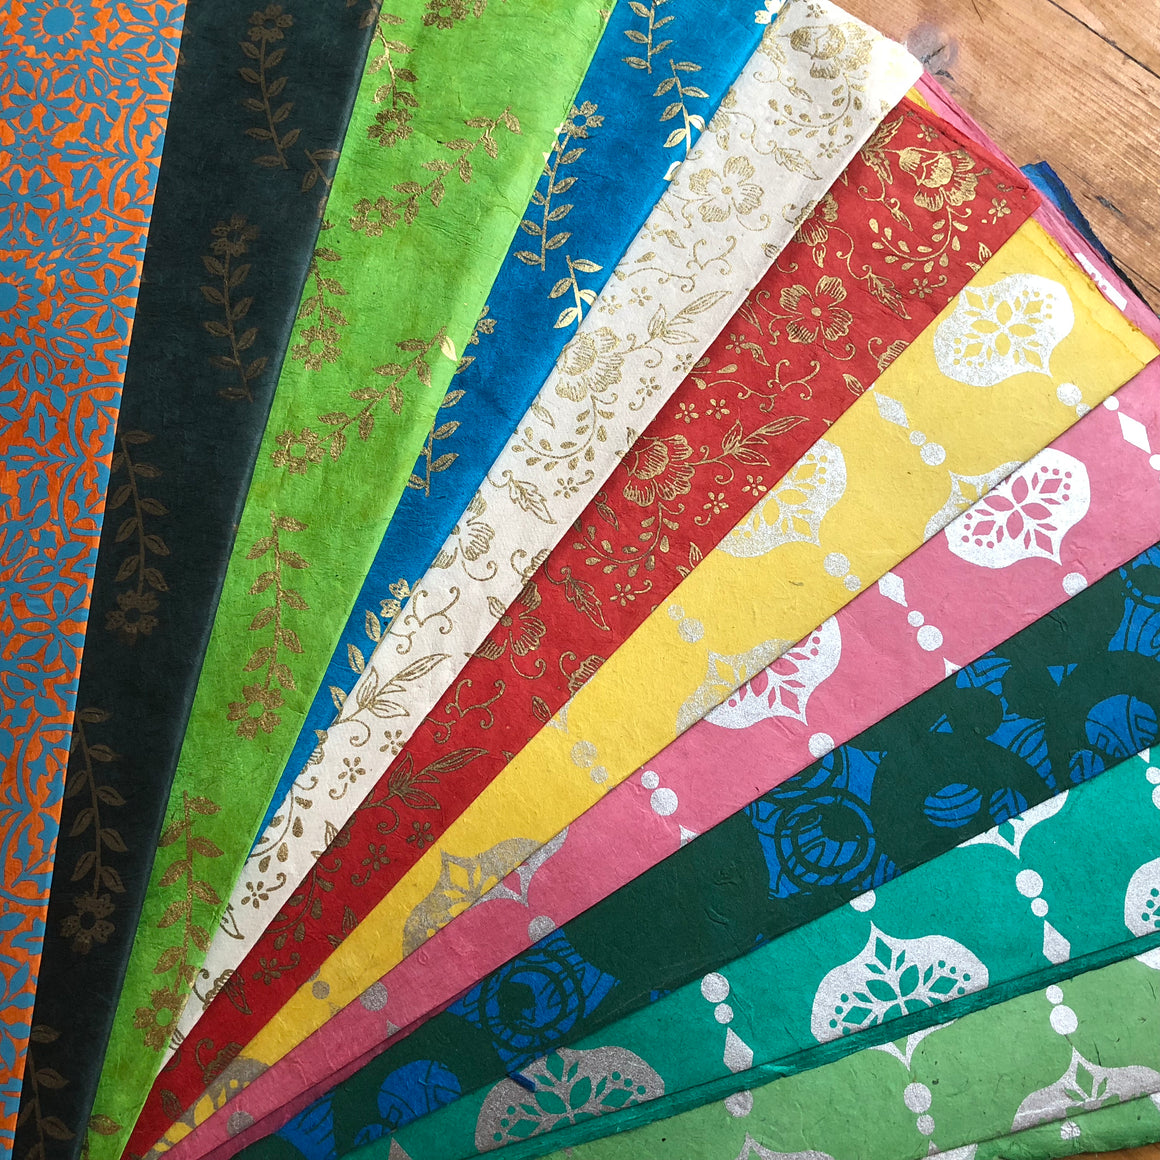 Fair Trade handmade Nepalese gift wrapping paper - side view